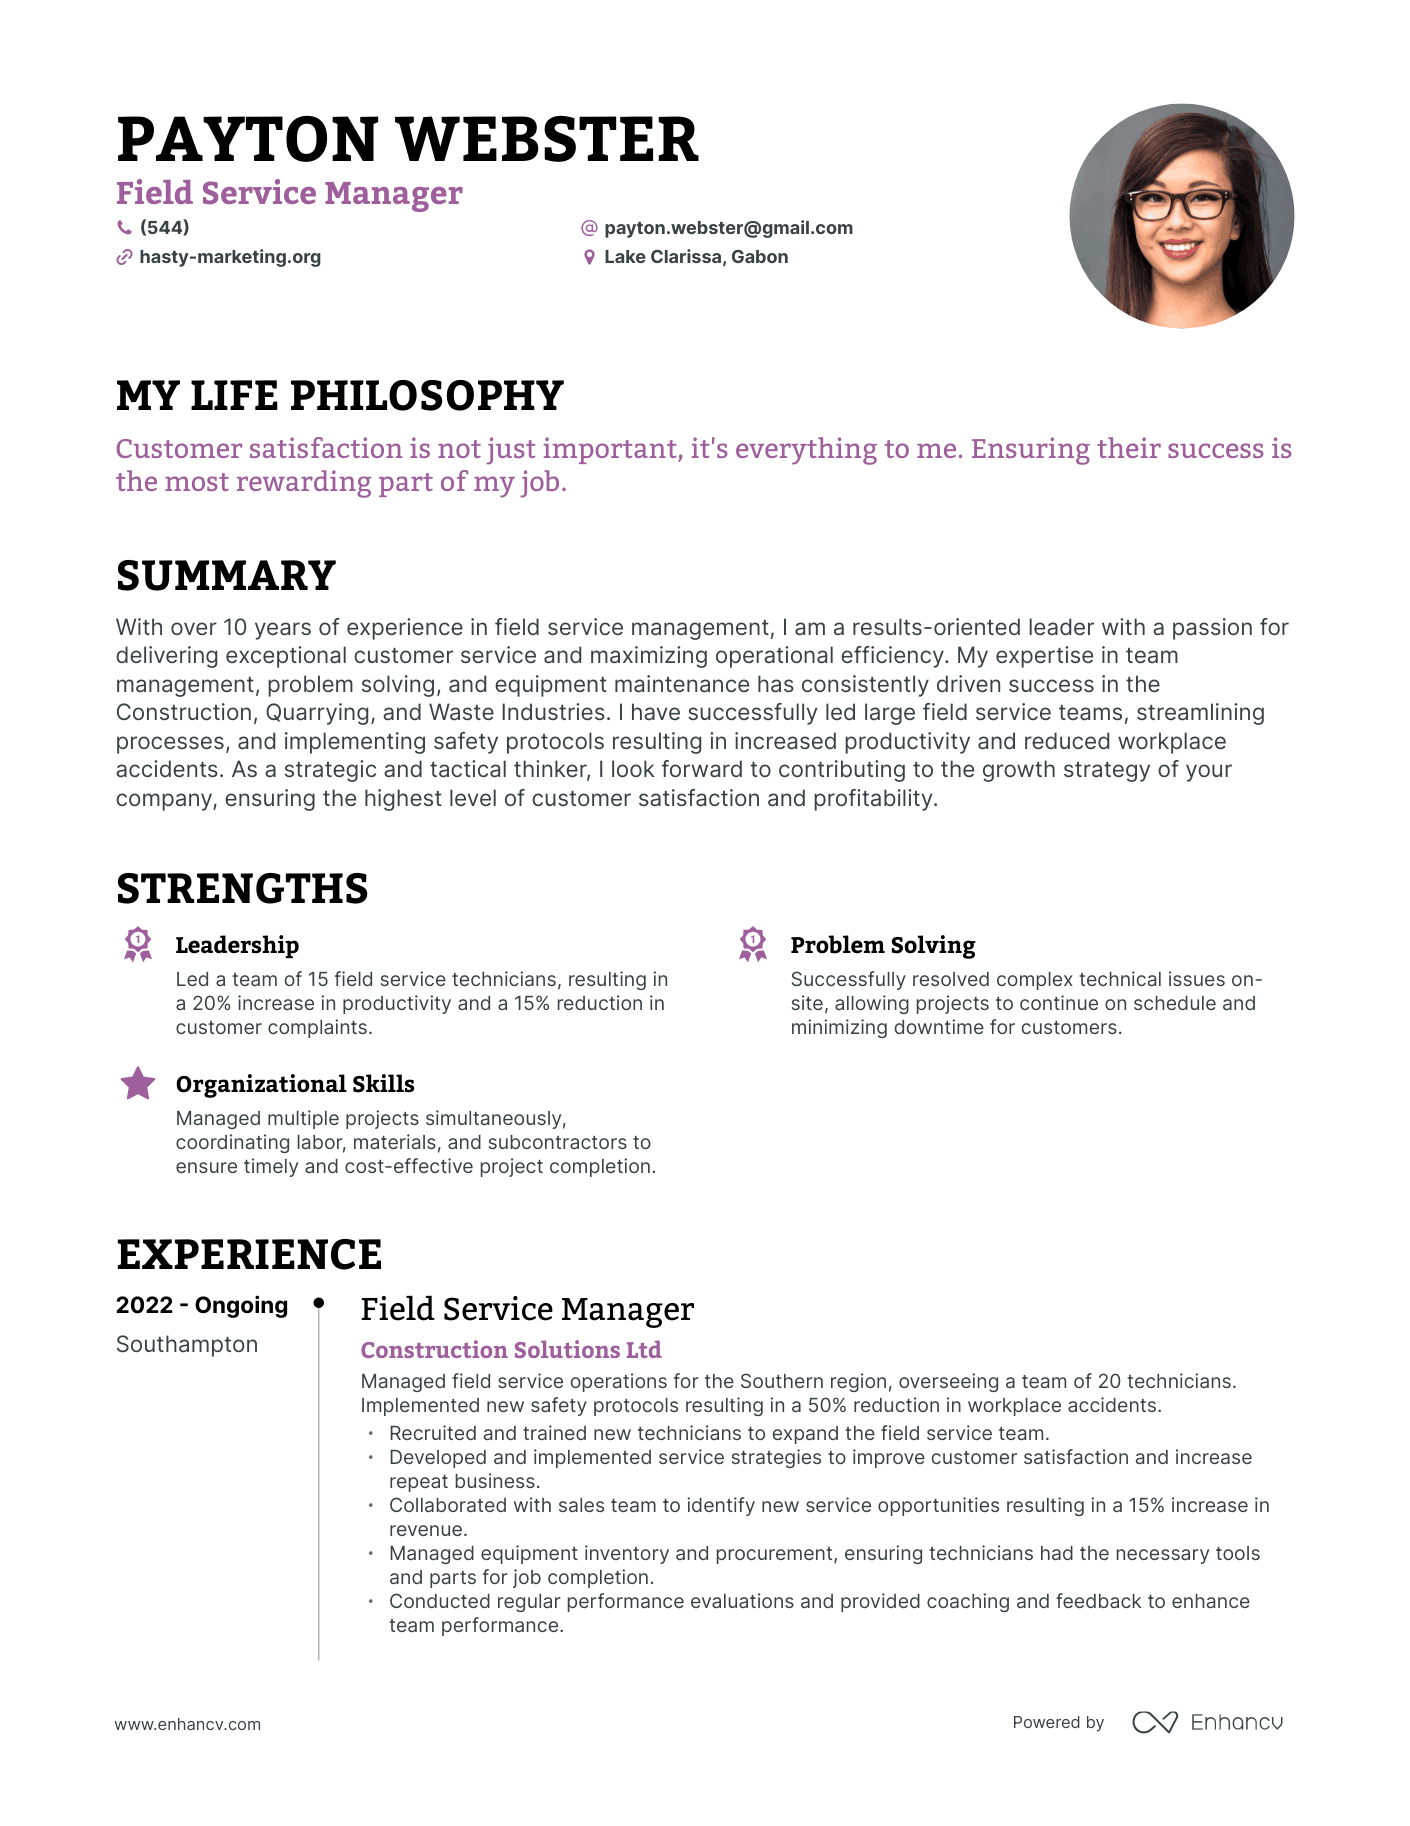 Creative Field Service Manager Resume Example